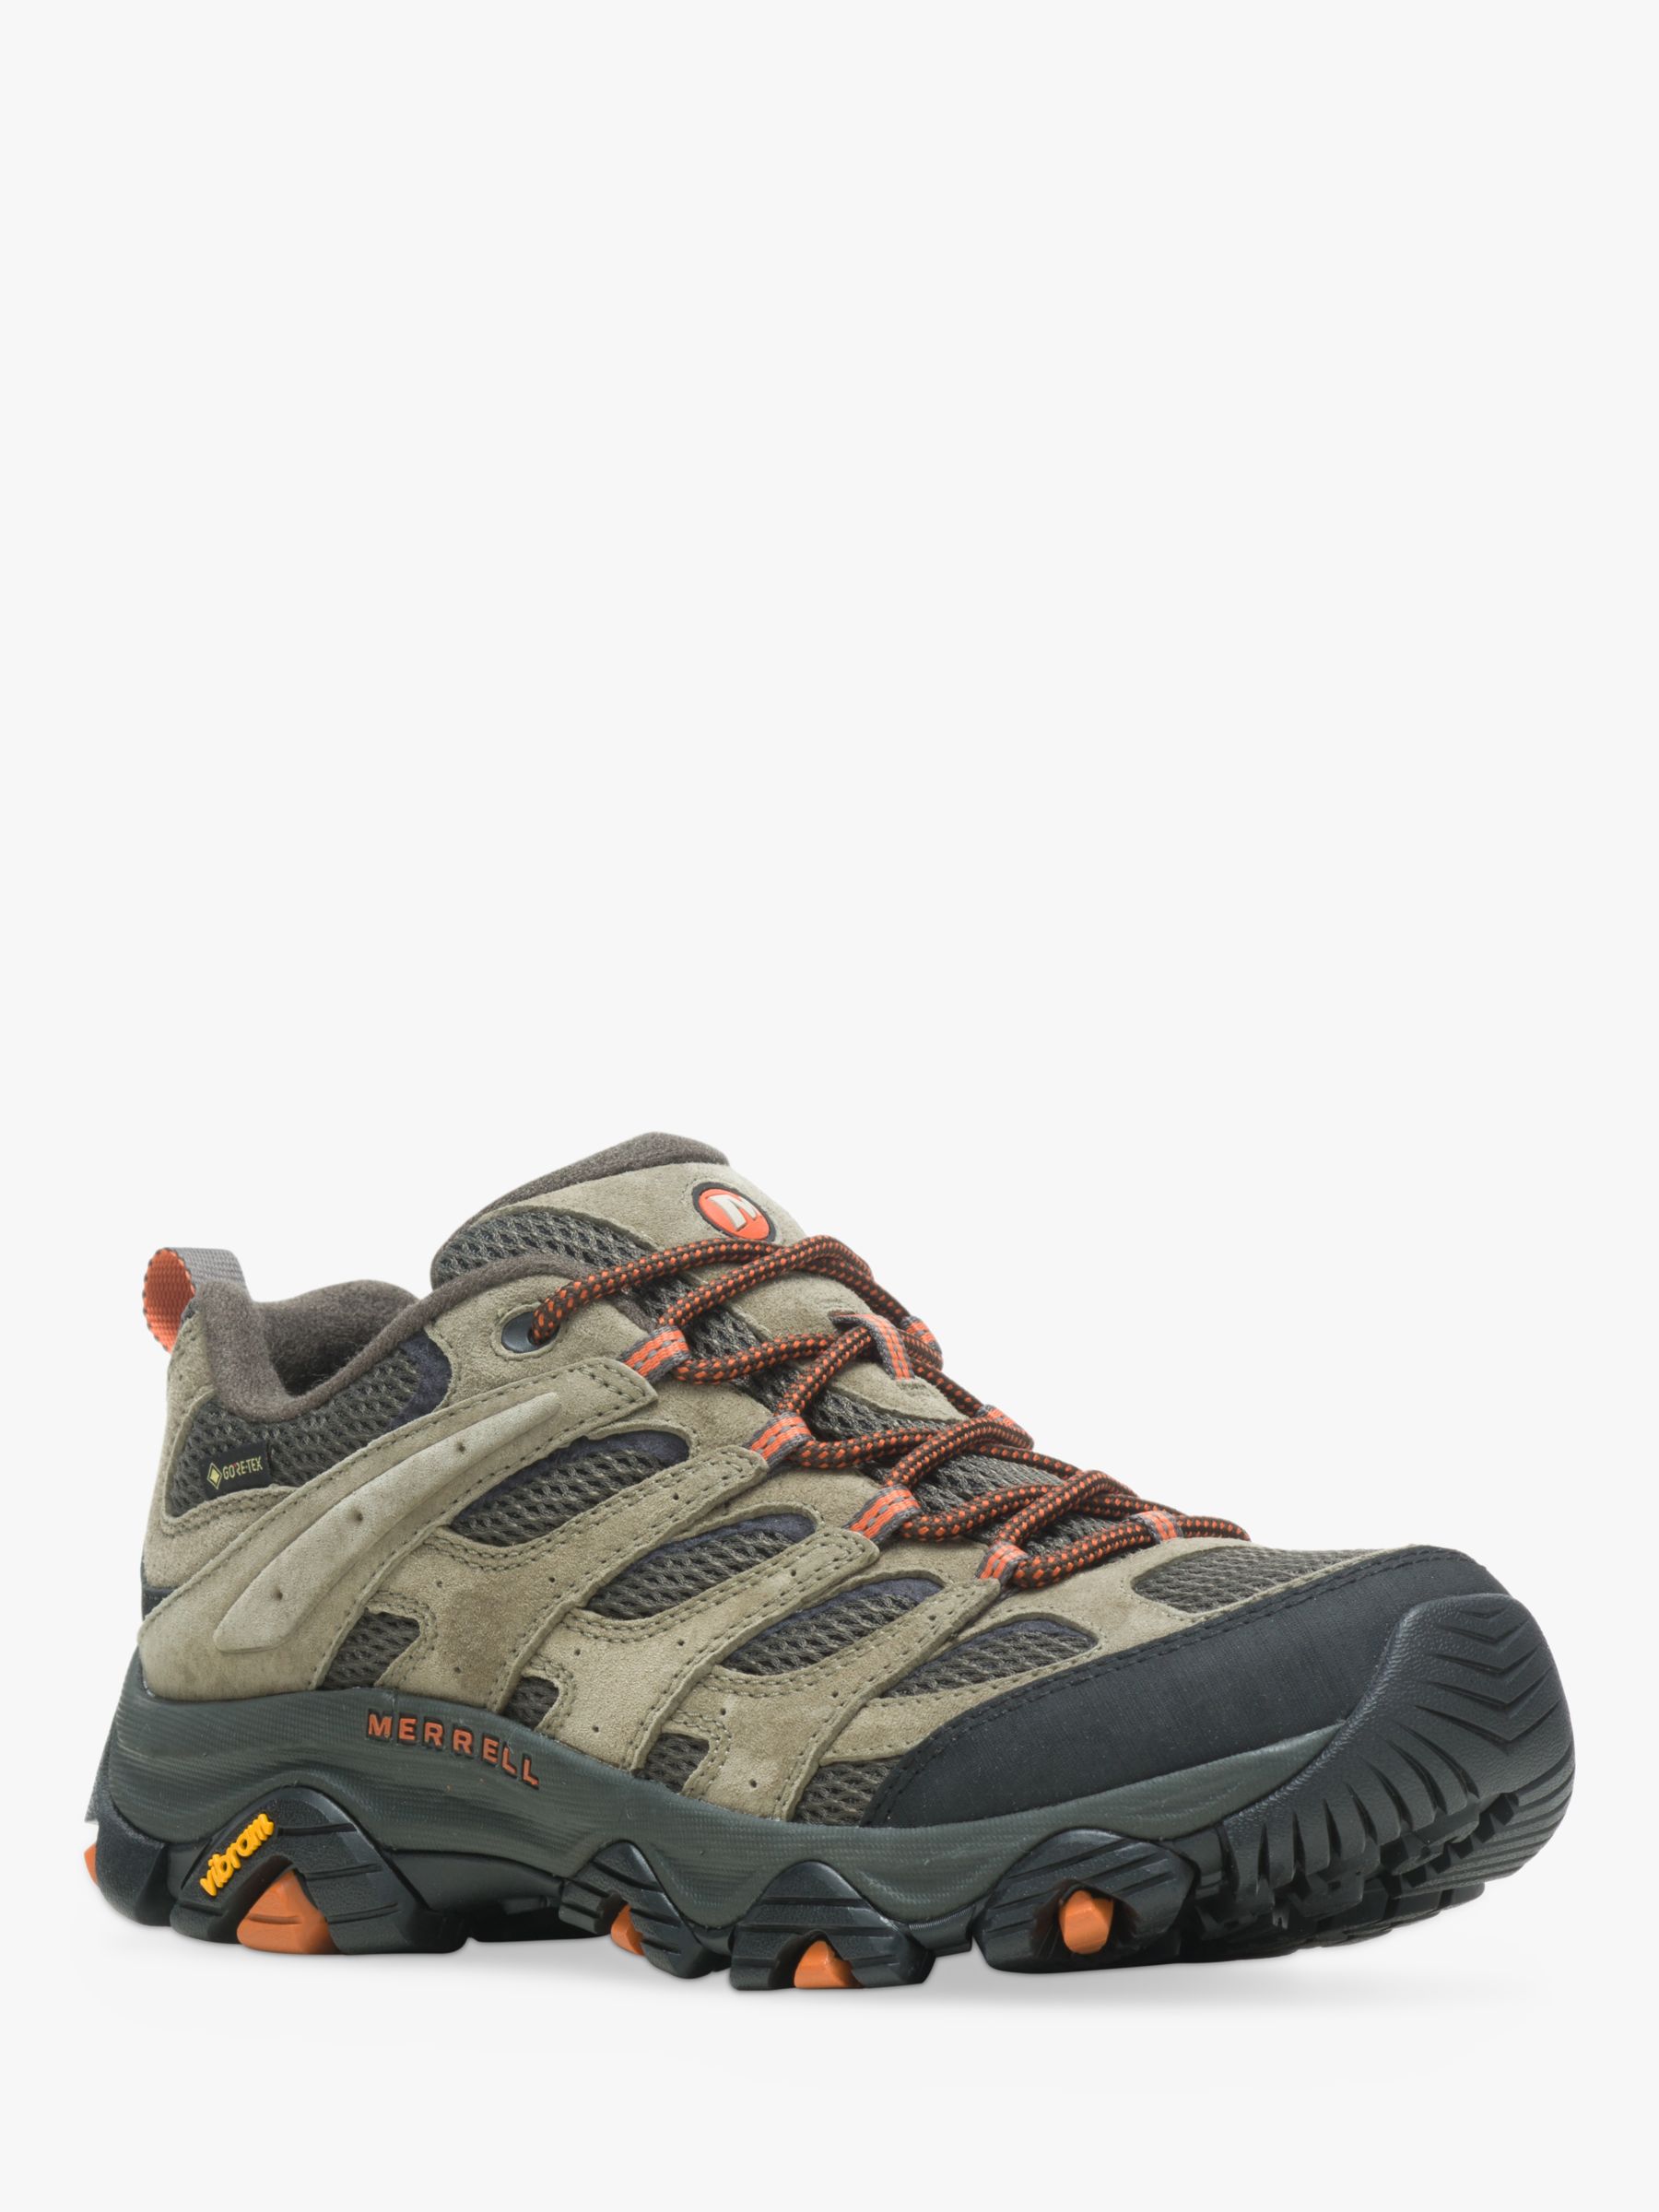 Merrell Moab Waterproof Hiking Shoes at Lewis & Partners